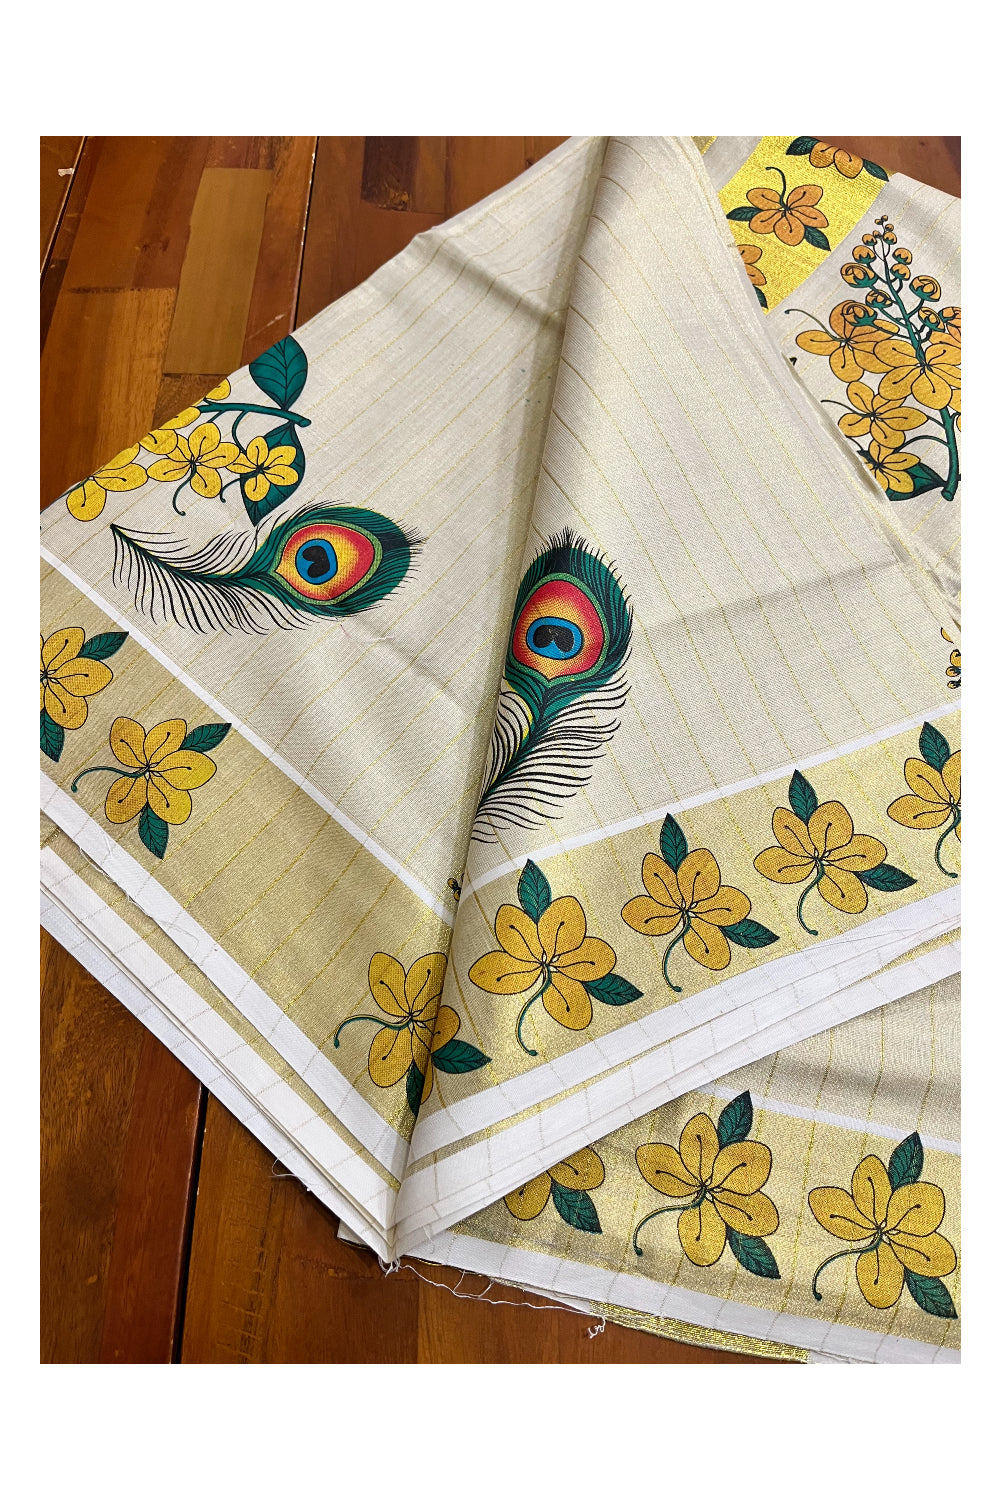 Kerala Tissue Kasavu Lines Design Saree with Feather And Floral Mural Prints on Body